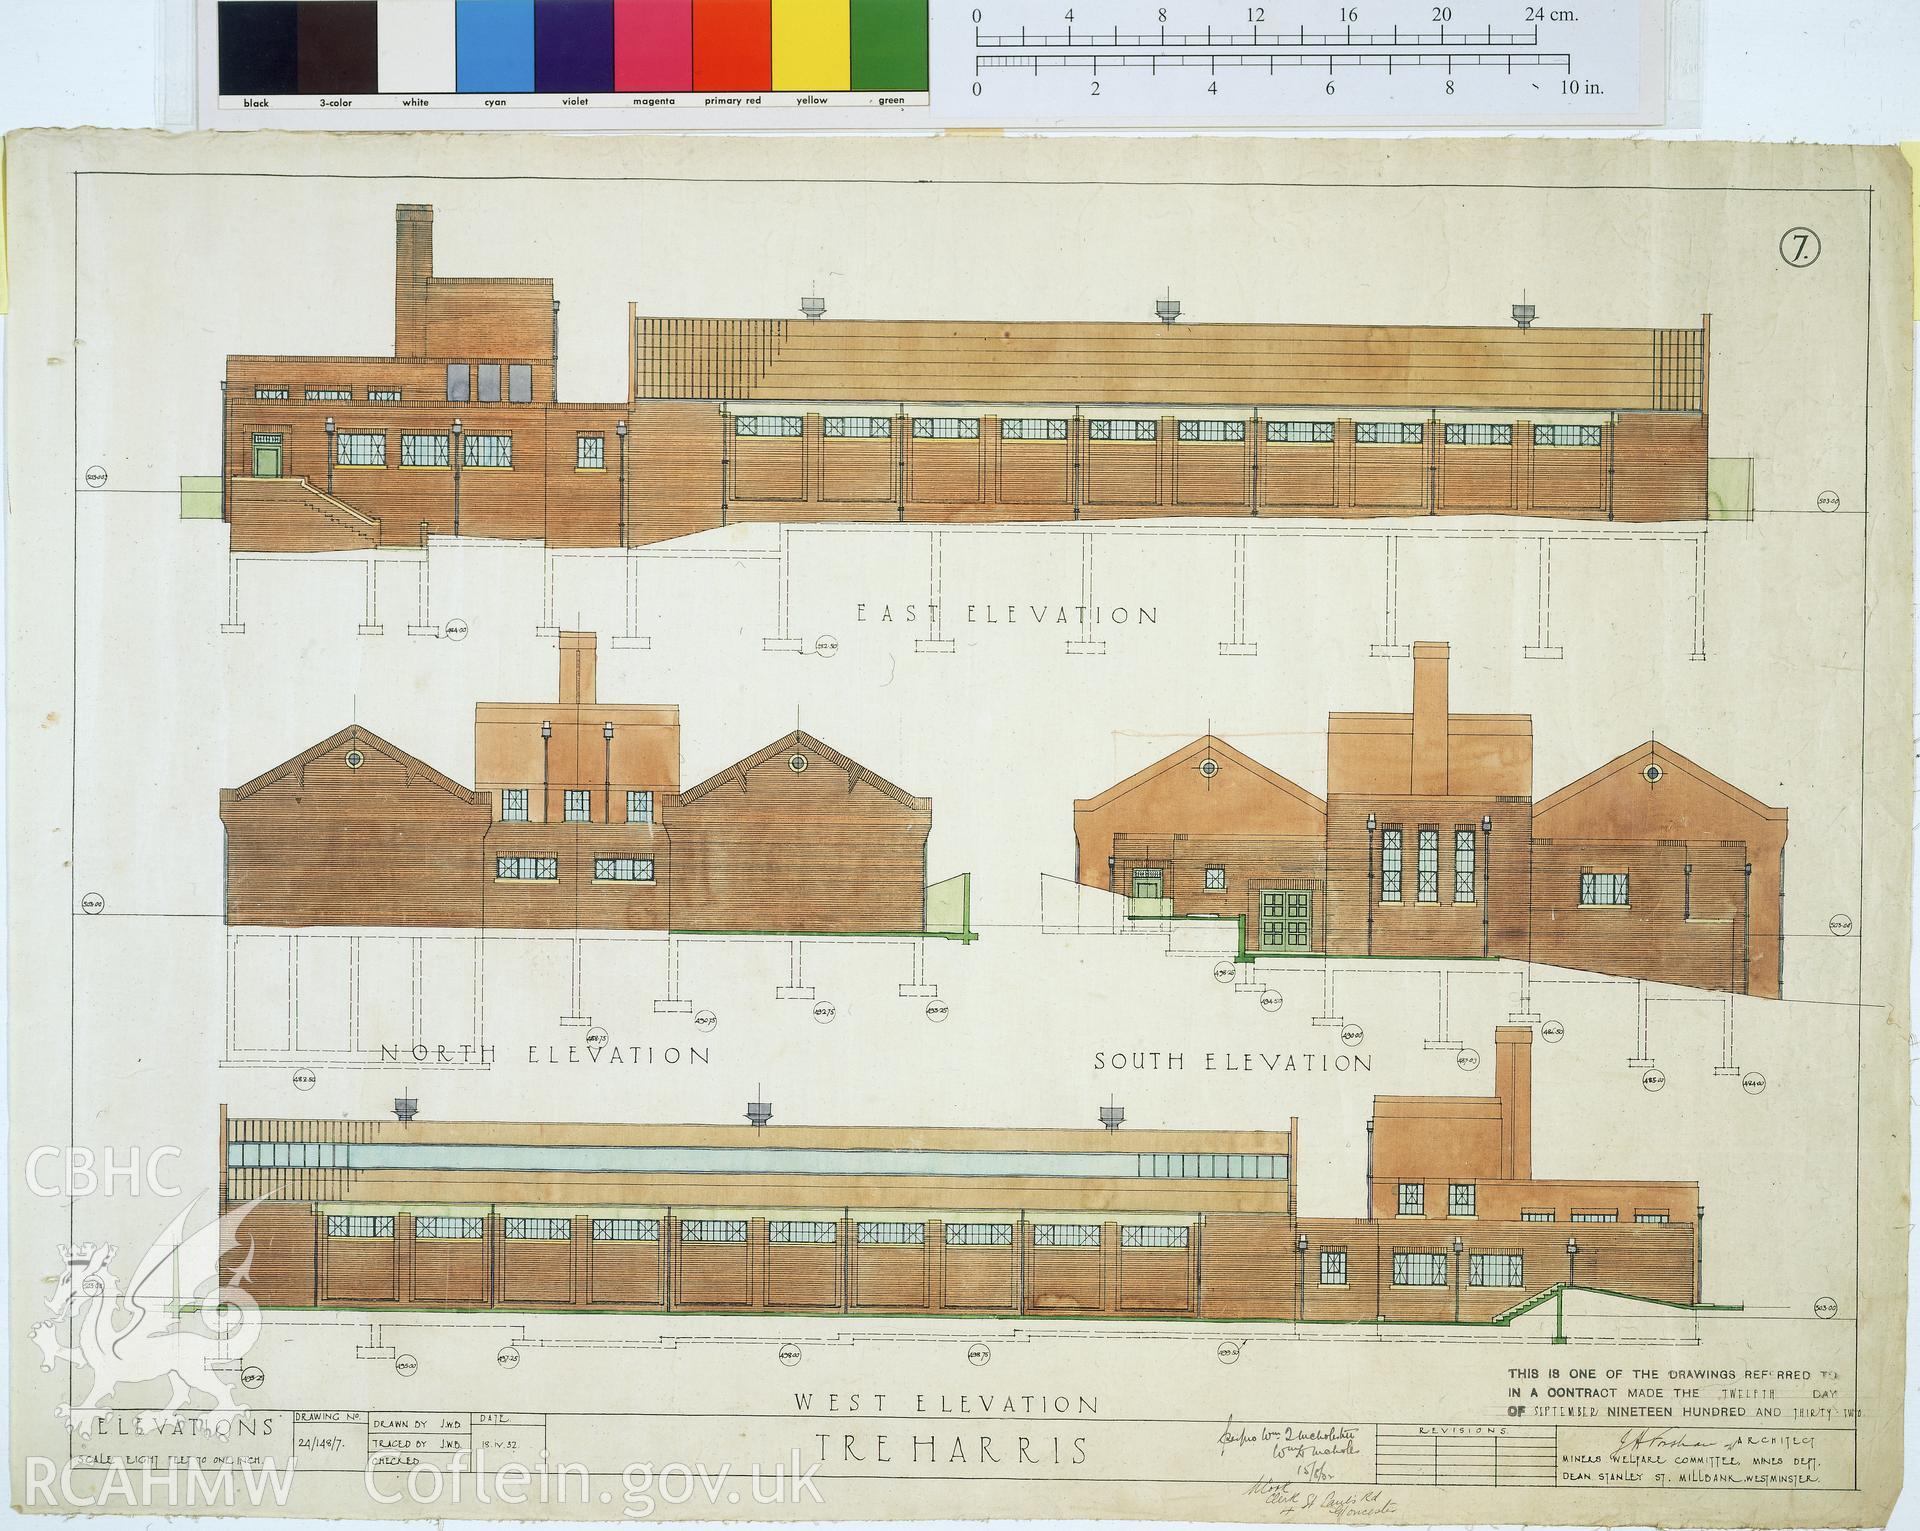 Colour transparency of a measured drawing showing elevation views of the Bath House at  Ocean Deep Navigation Colliery , by J.H. Forshaw, Architect, 1932, from originals currently held by Gwent Record Office pending distribution to relevant county.